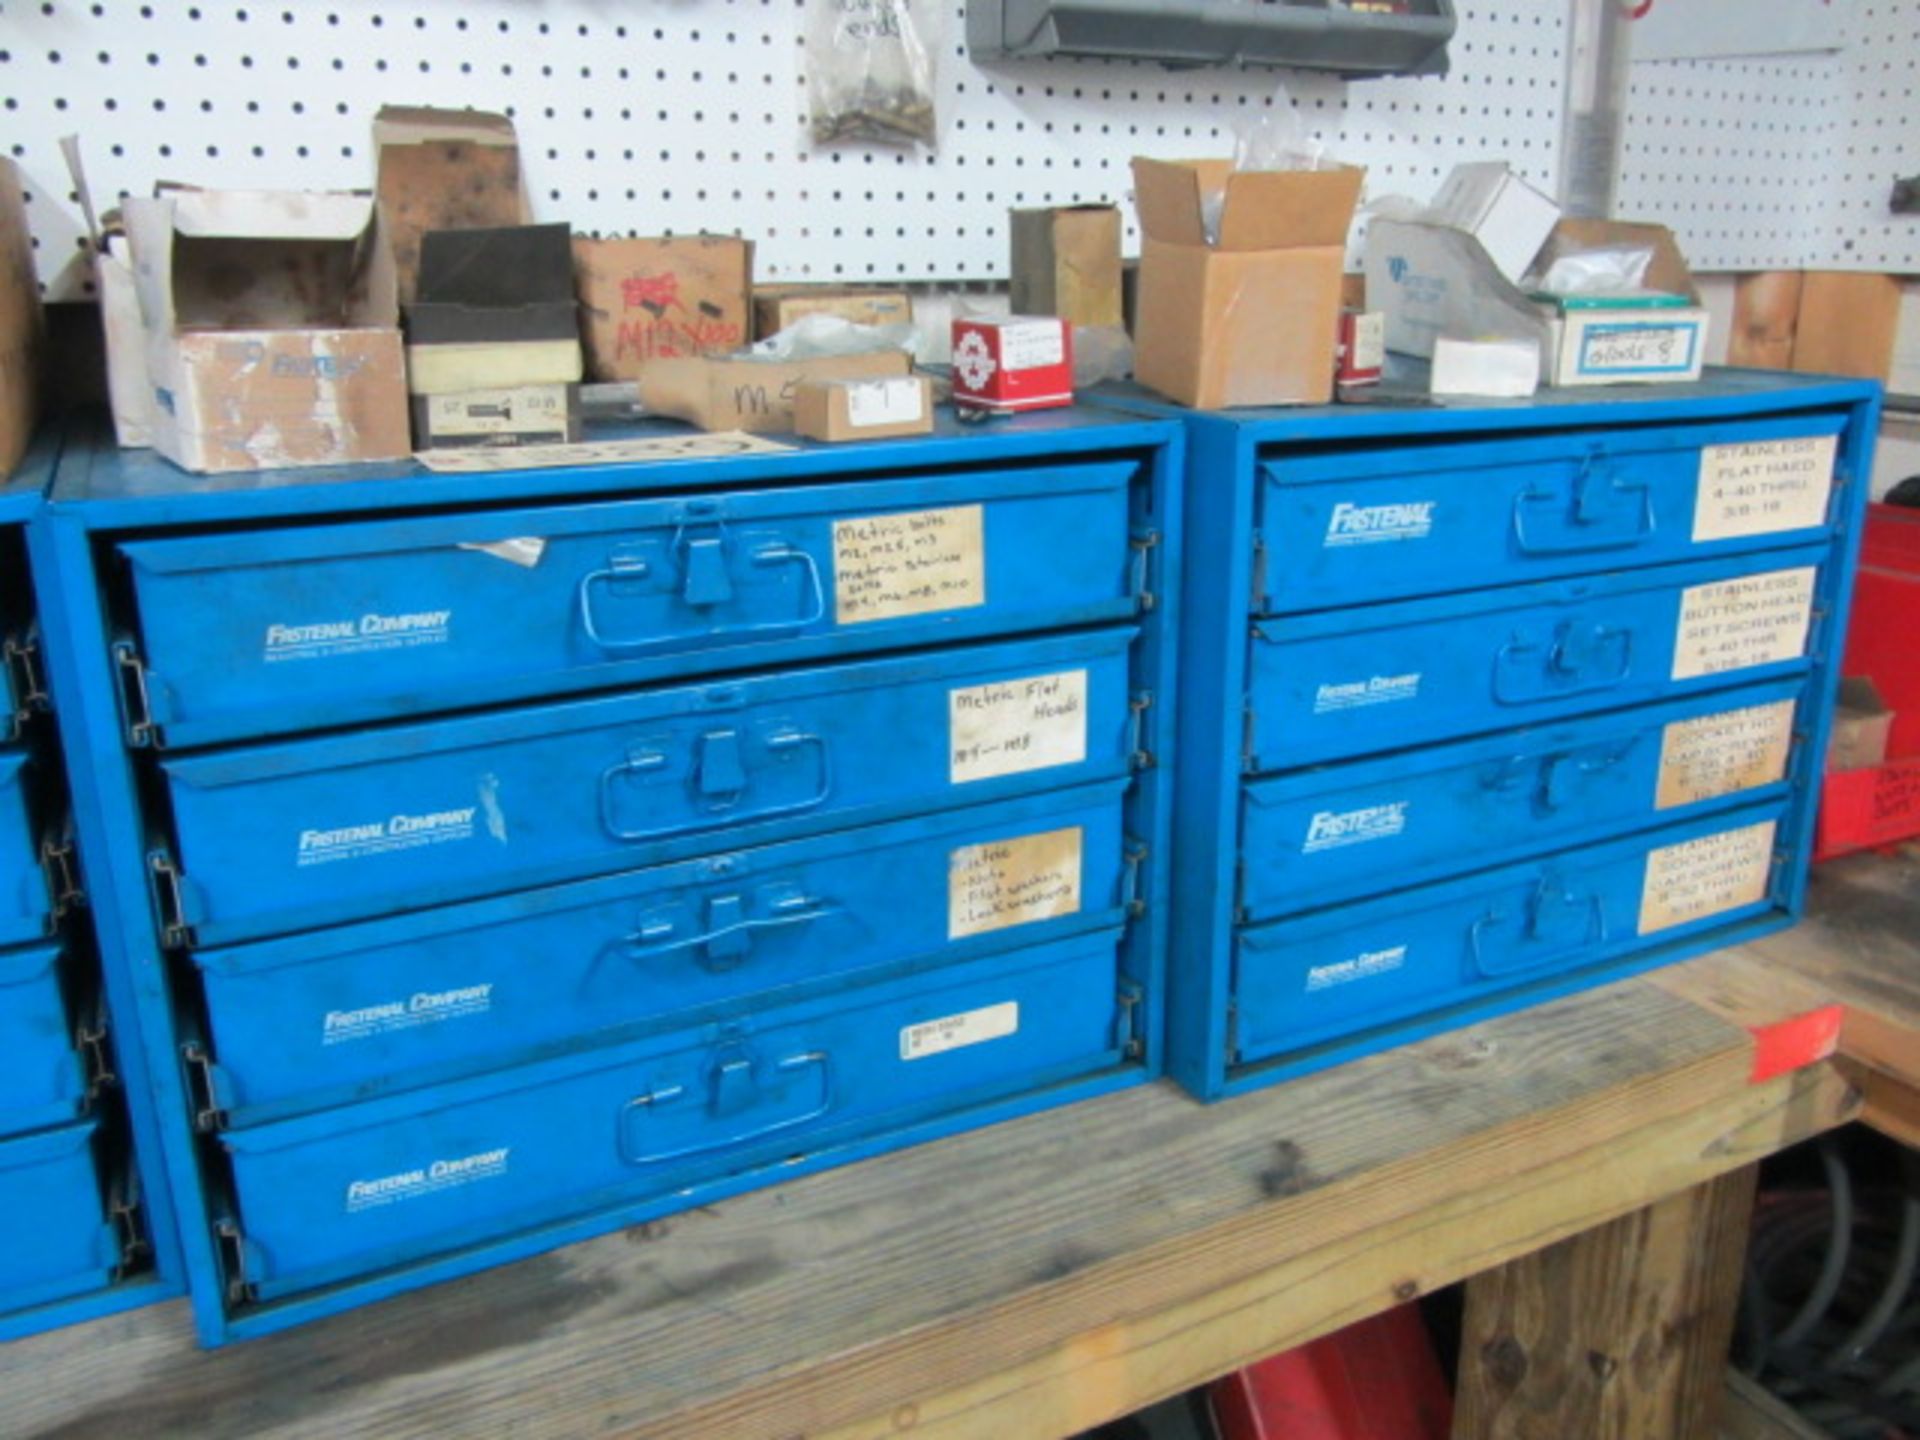 (8) Fastenal Slide Out Drawers